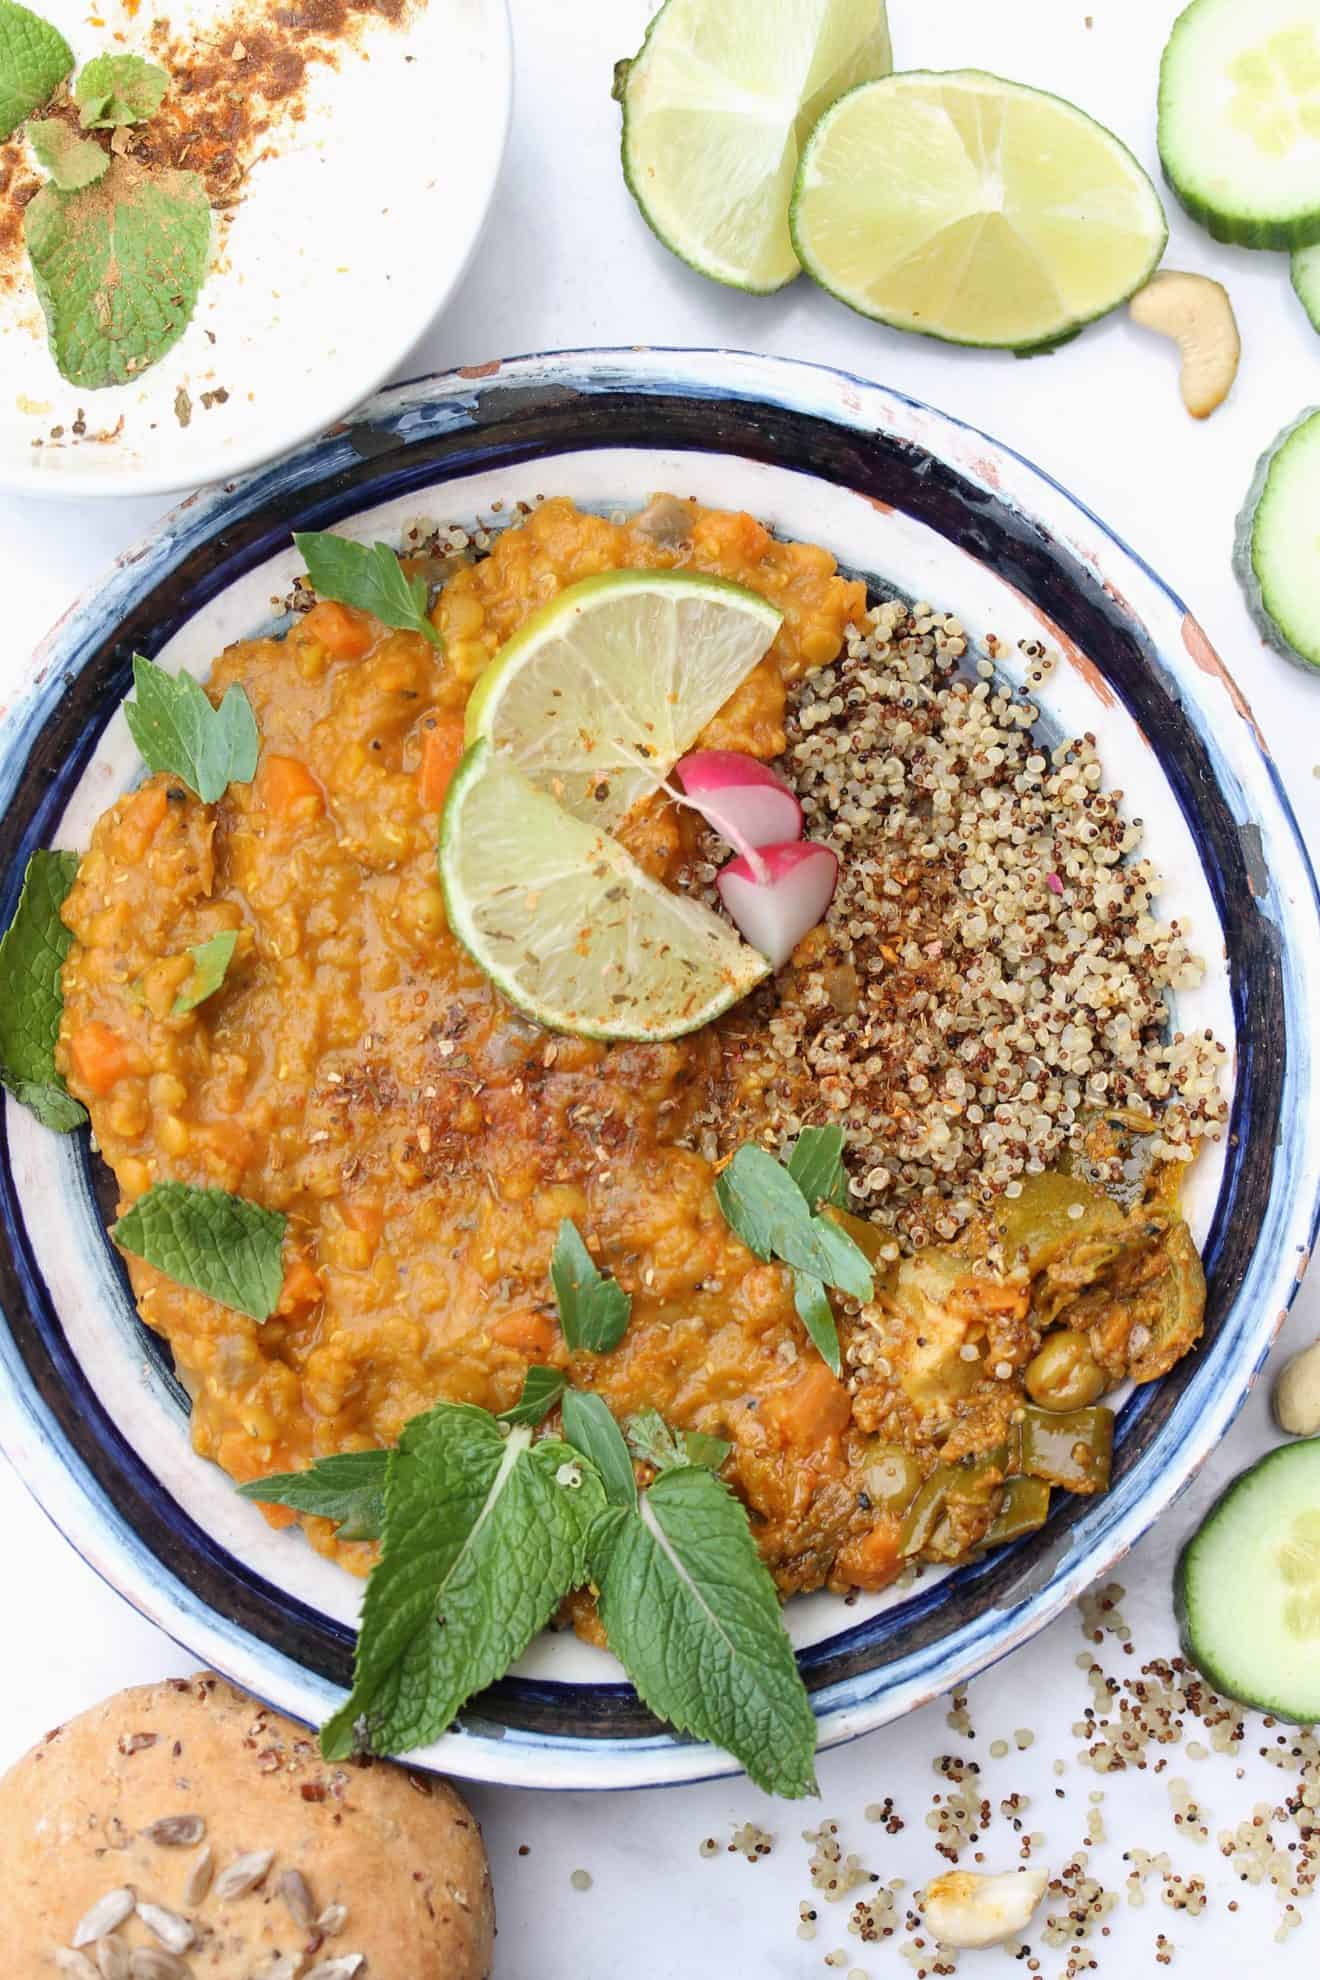 Indian Lentil Daal - "Claire's all-time Classic " - True Foods Blog